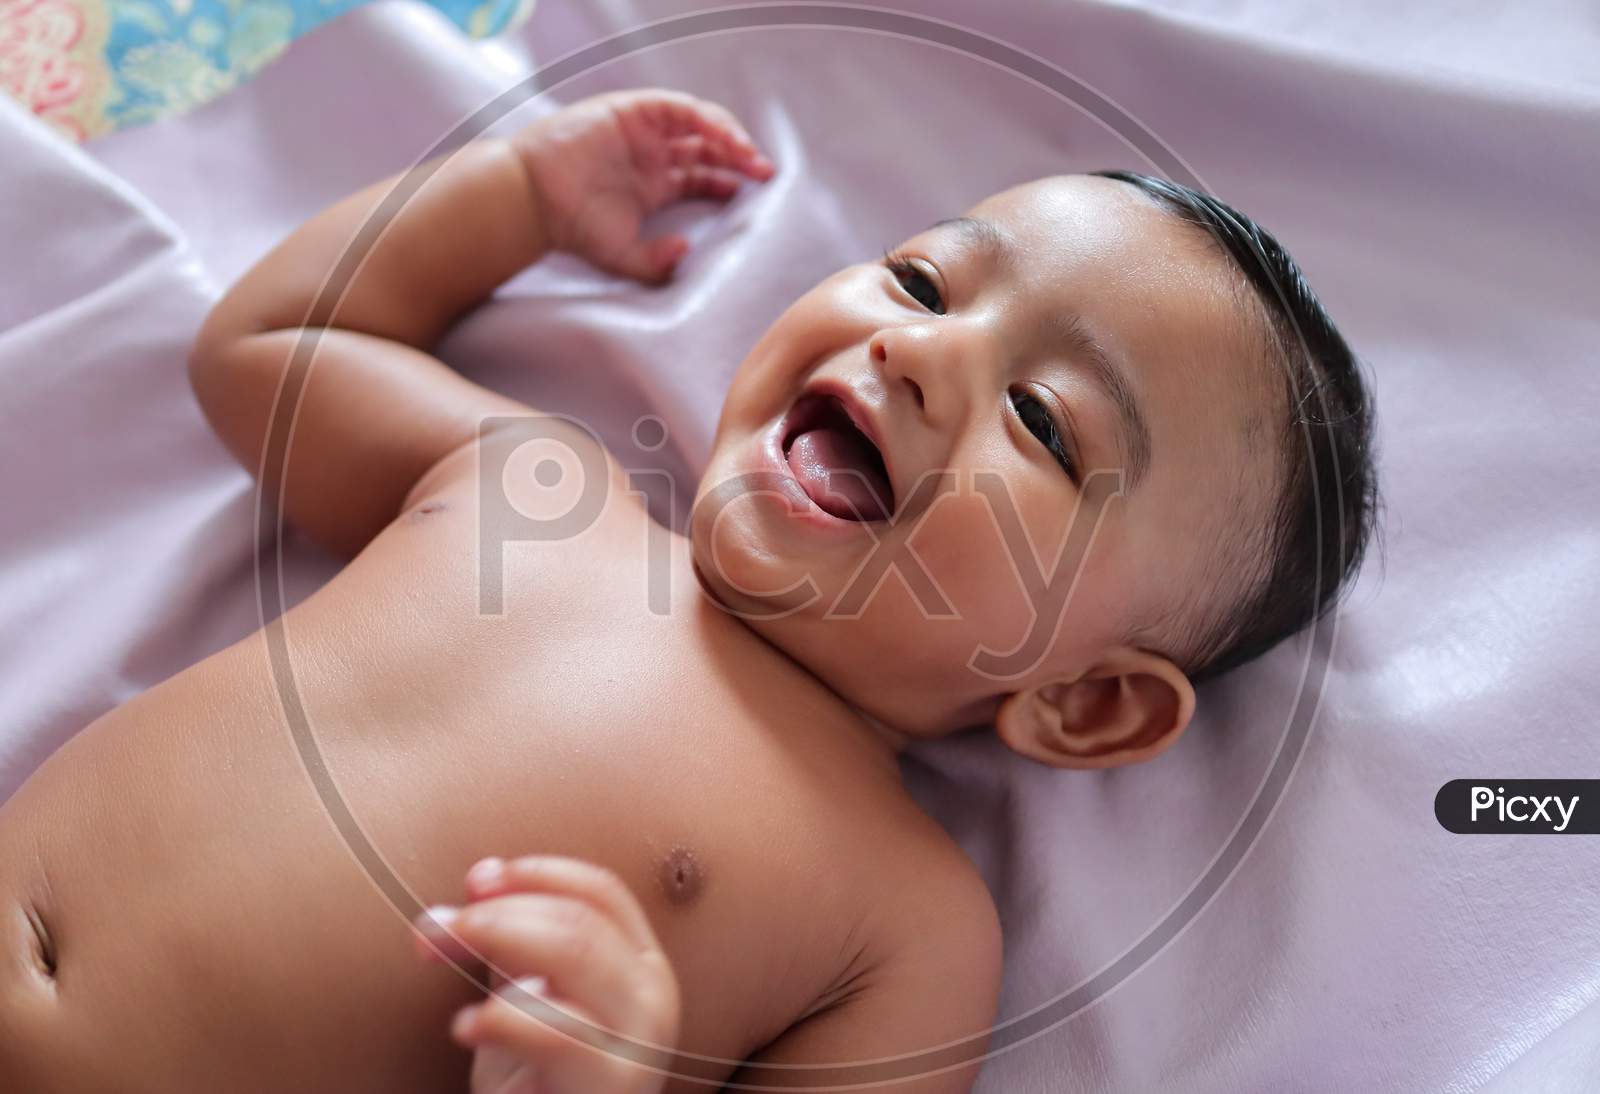 Download Cute Babies images  71 HD pictures and stock photos